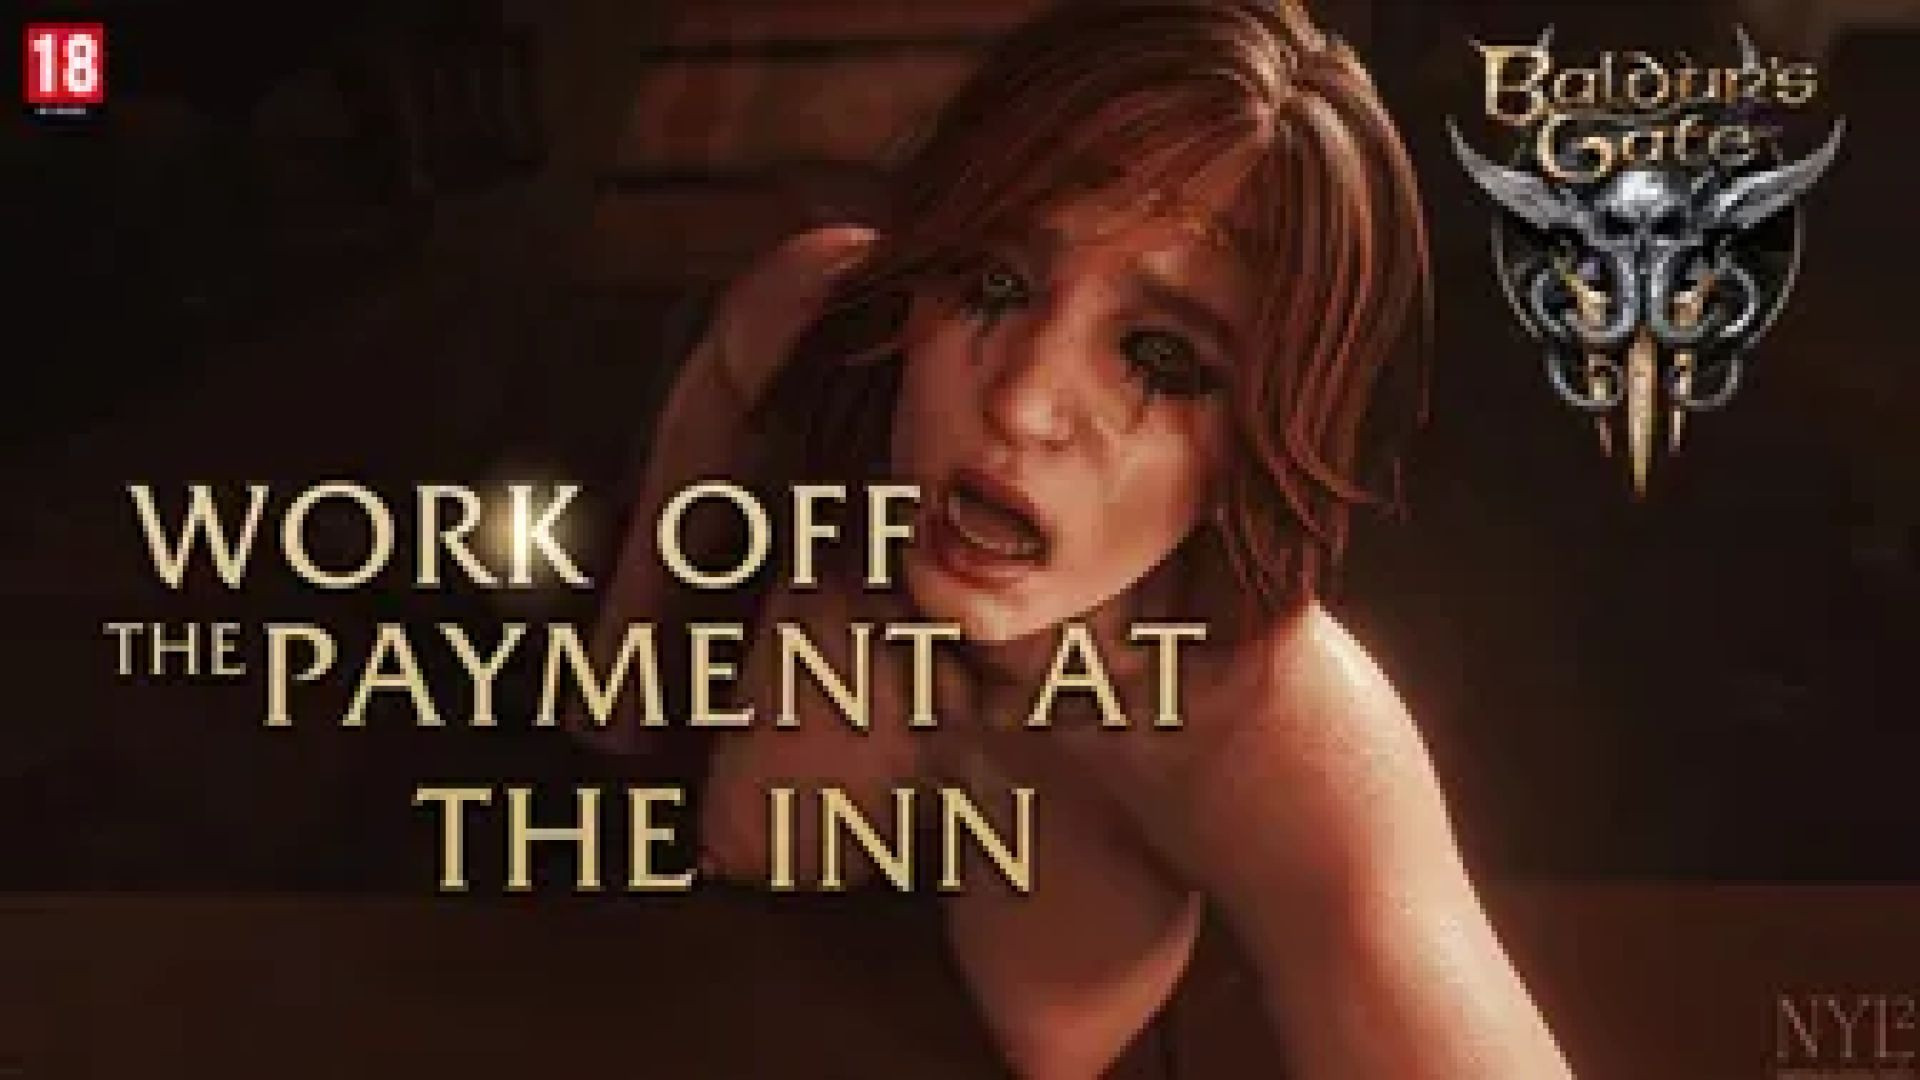 Working off the payment at the inn